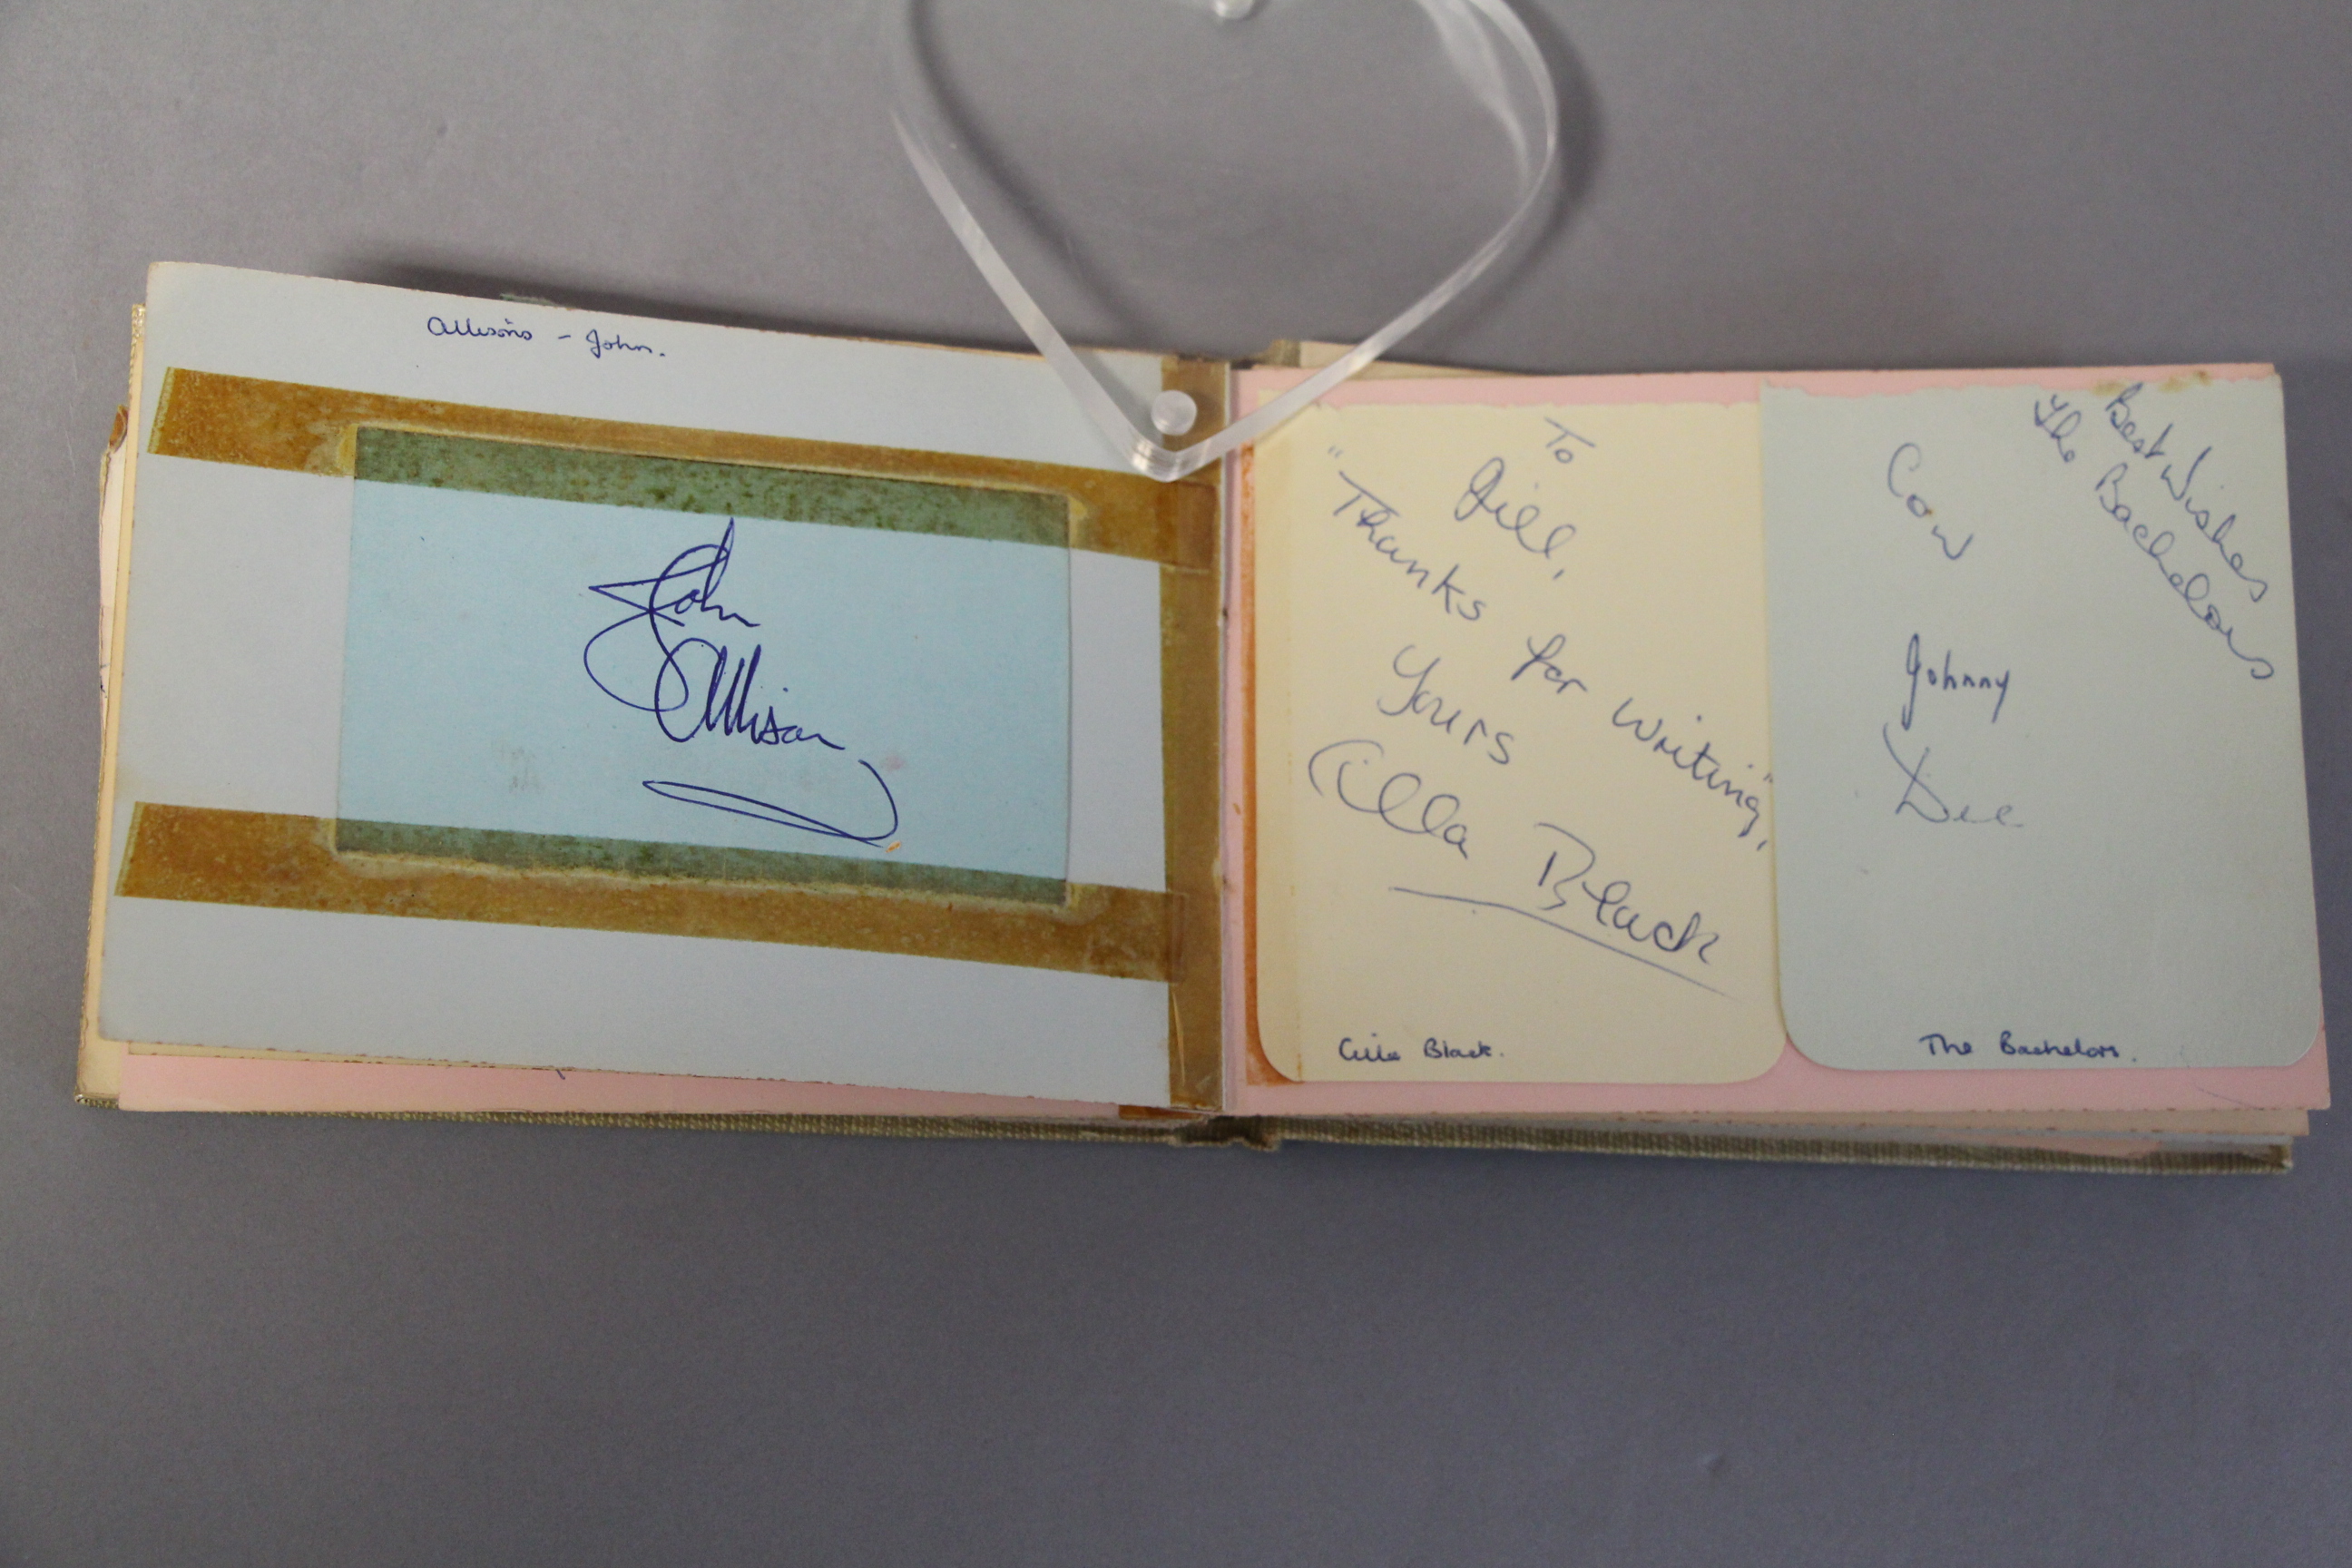 An Autograph book collected by a lady called Jill F whose full name and address appears in the book - Image 13 of 17